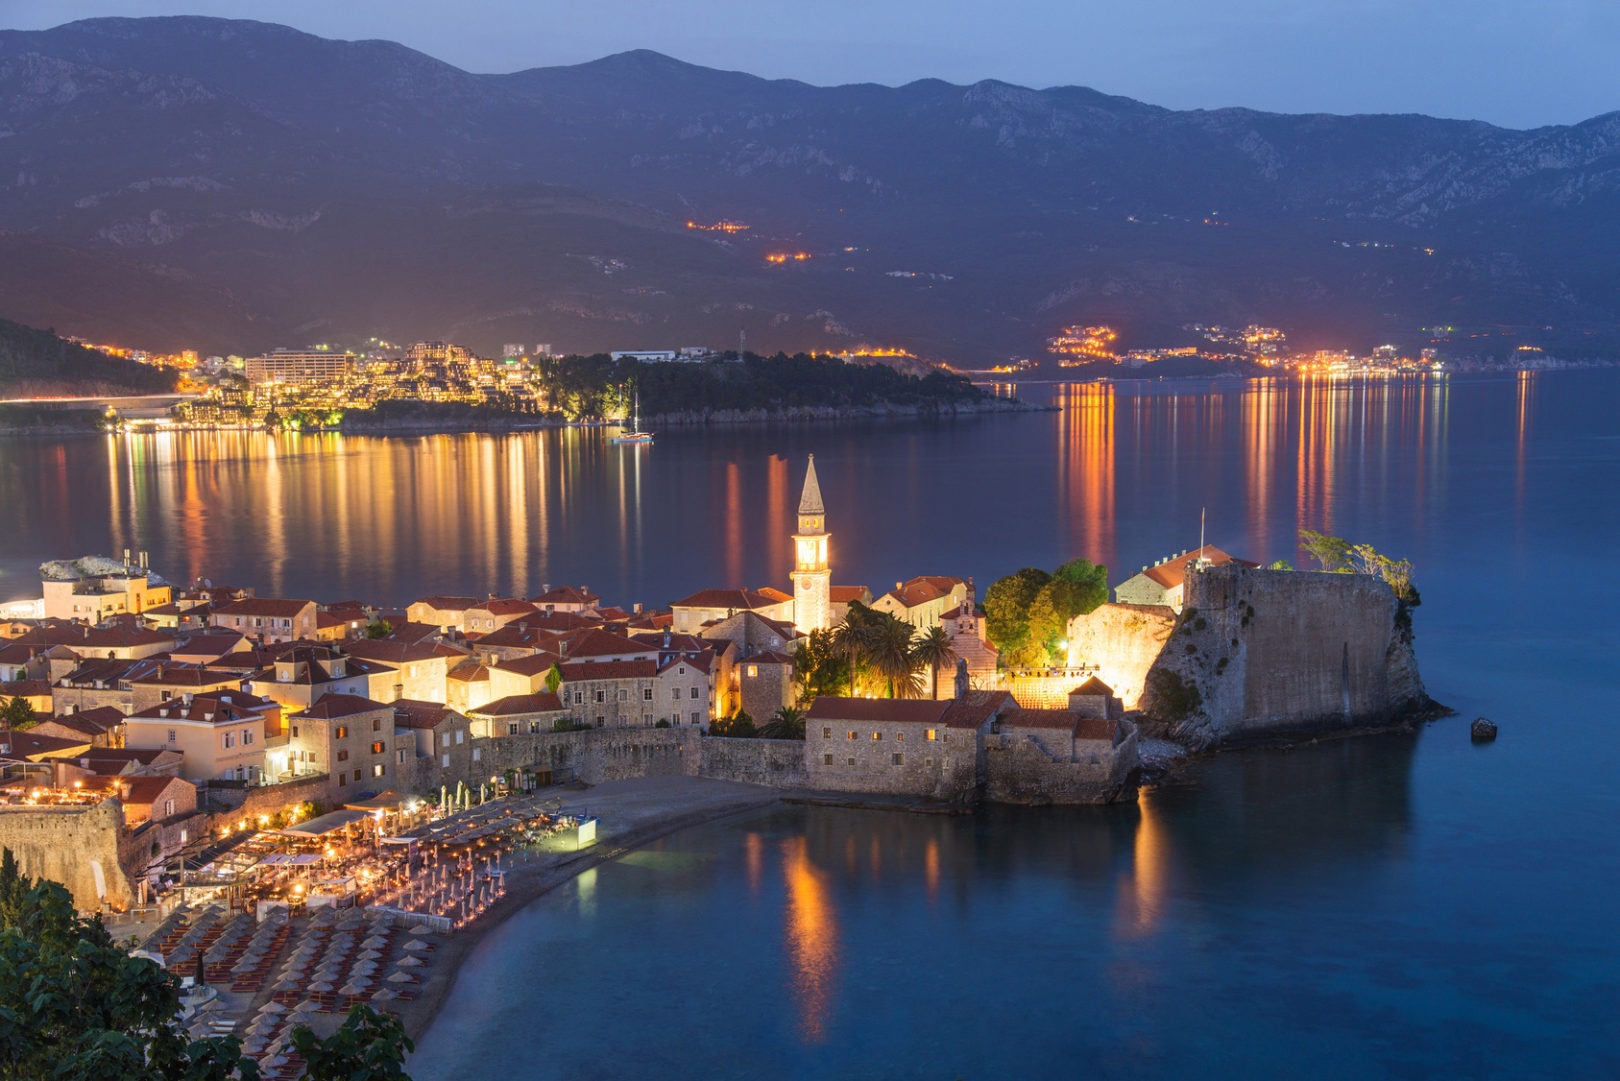 Budva old medieval walled city lights at night. Center of Montenegrin tourism, medieval walled city at Adriatic sea coastline. Montenegro. Europe.